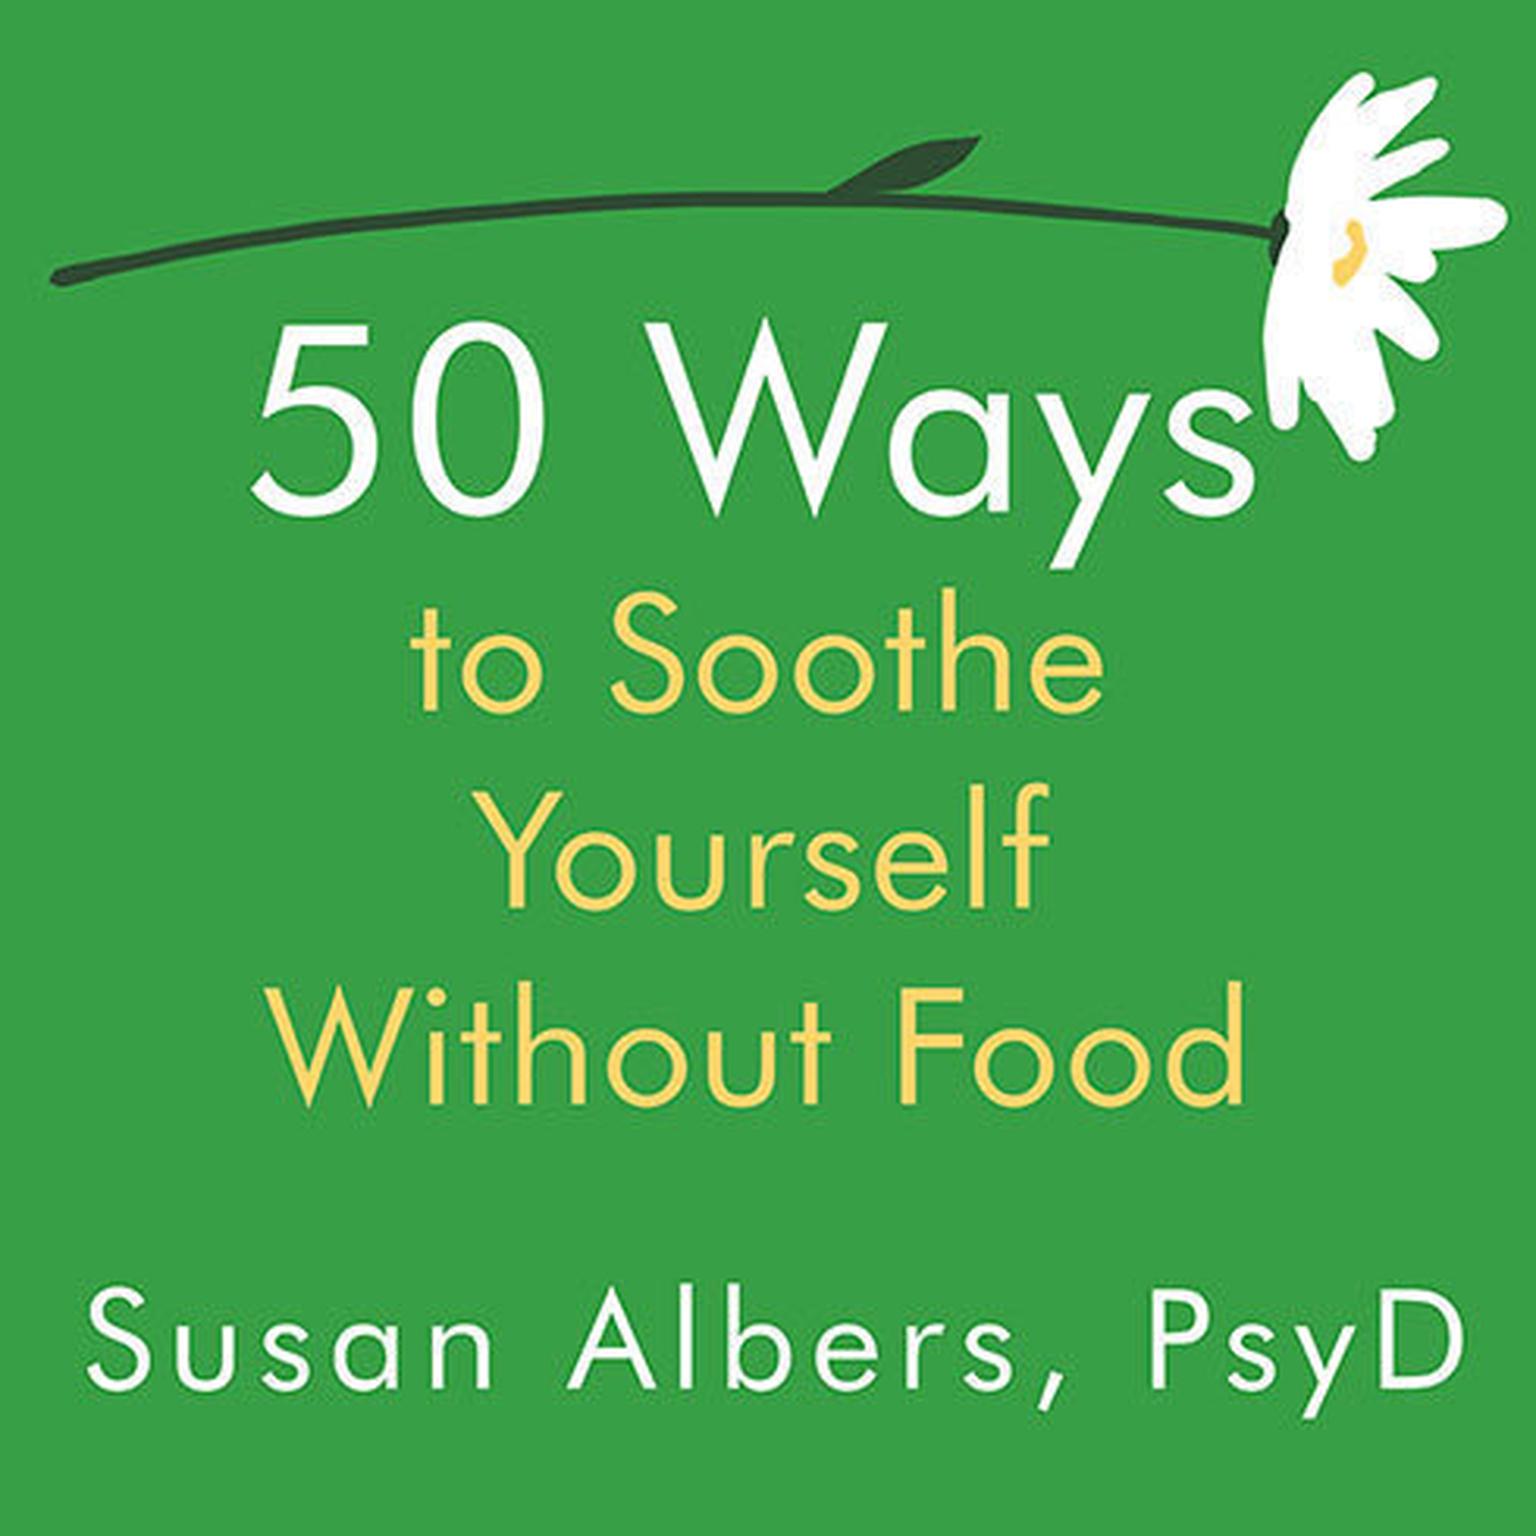 50 Ways to Soothe Yourself Without Food Audiobook, by Susan Albers